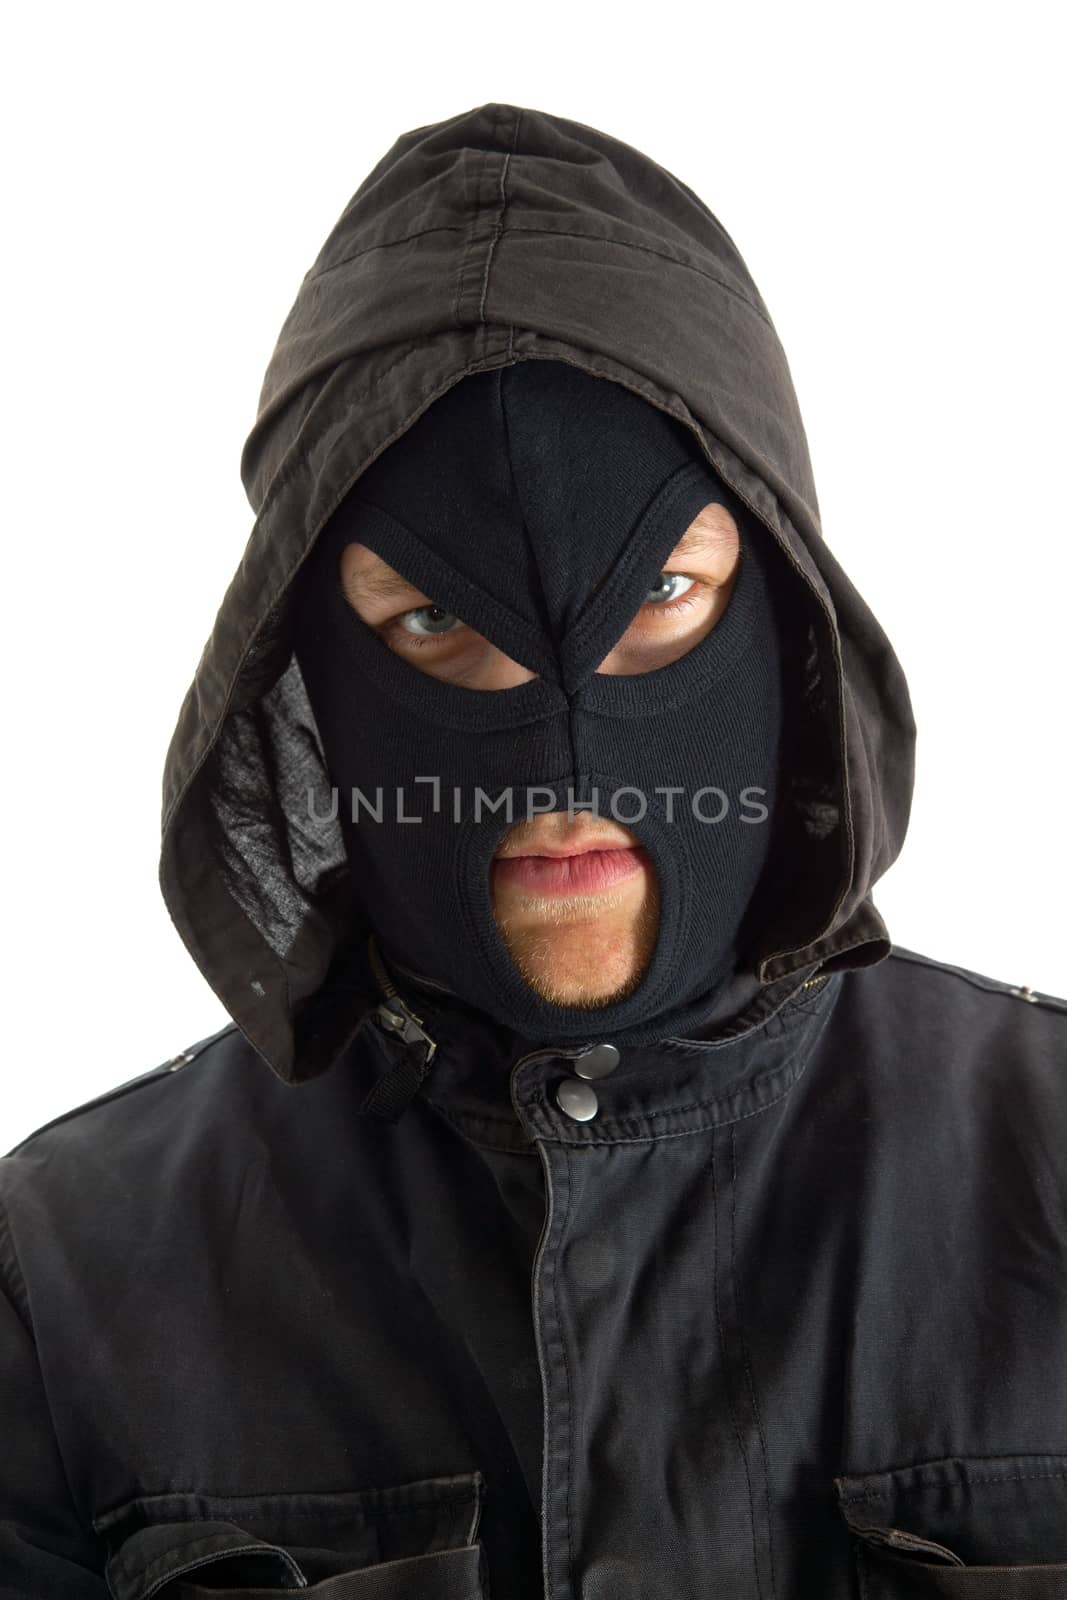 Man in mask against white background